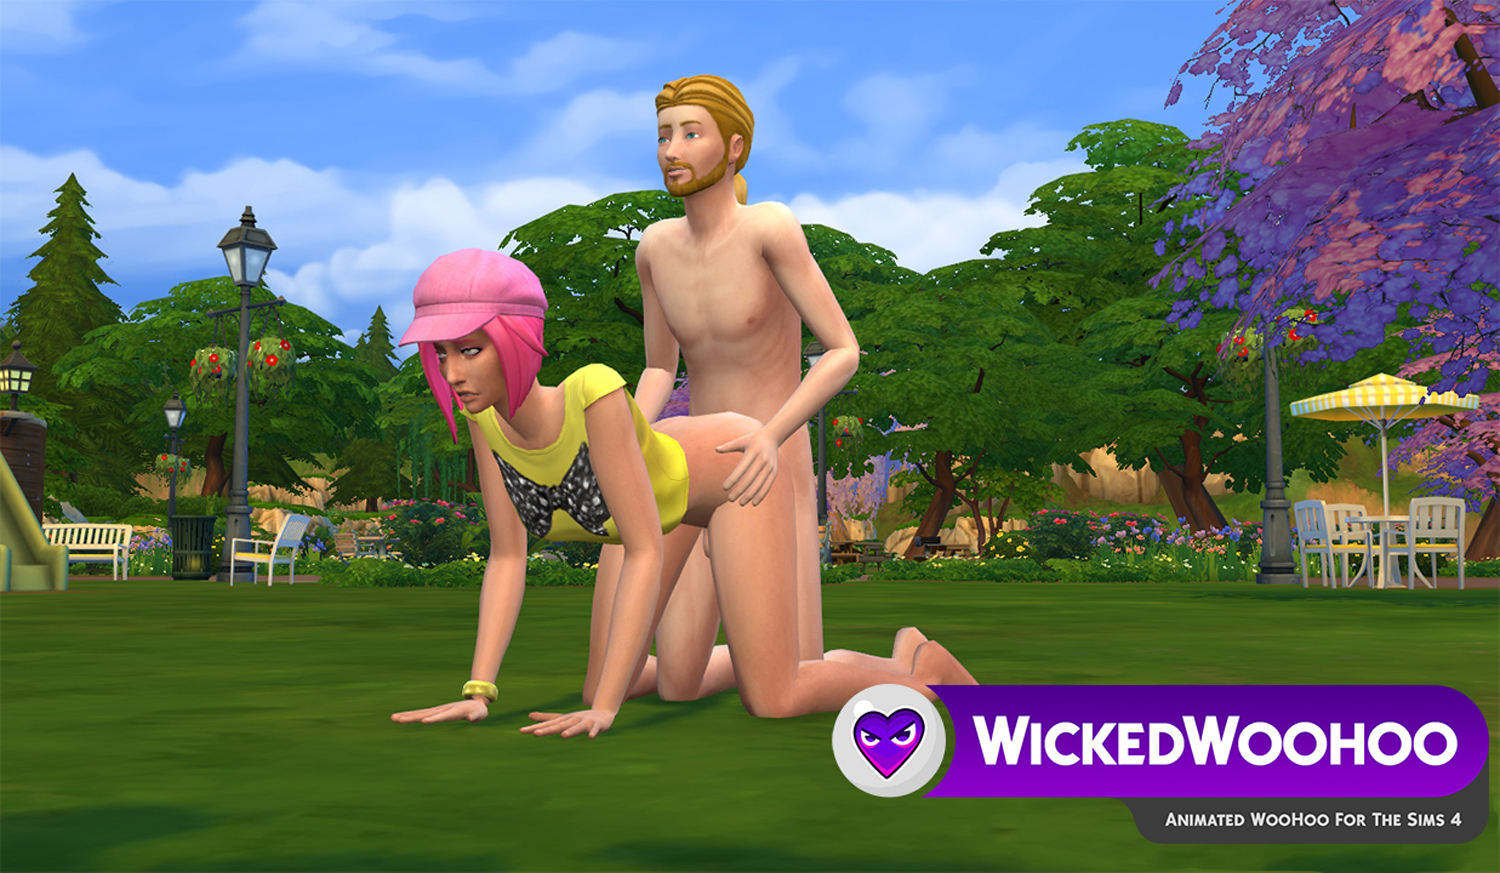 best of Orgy sims 4